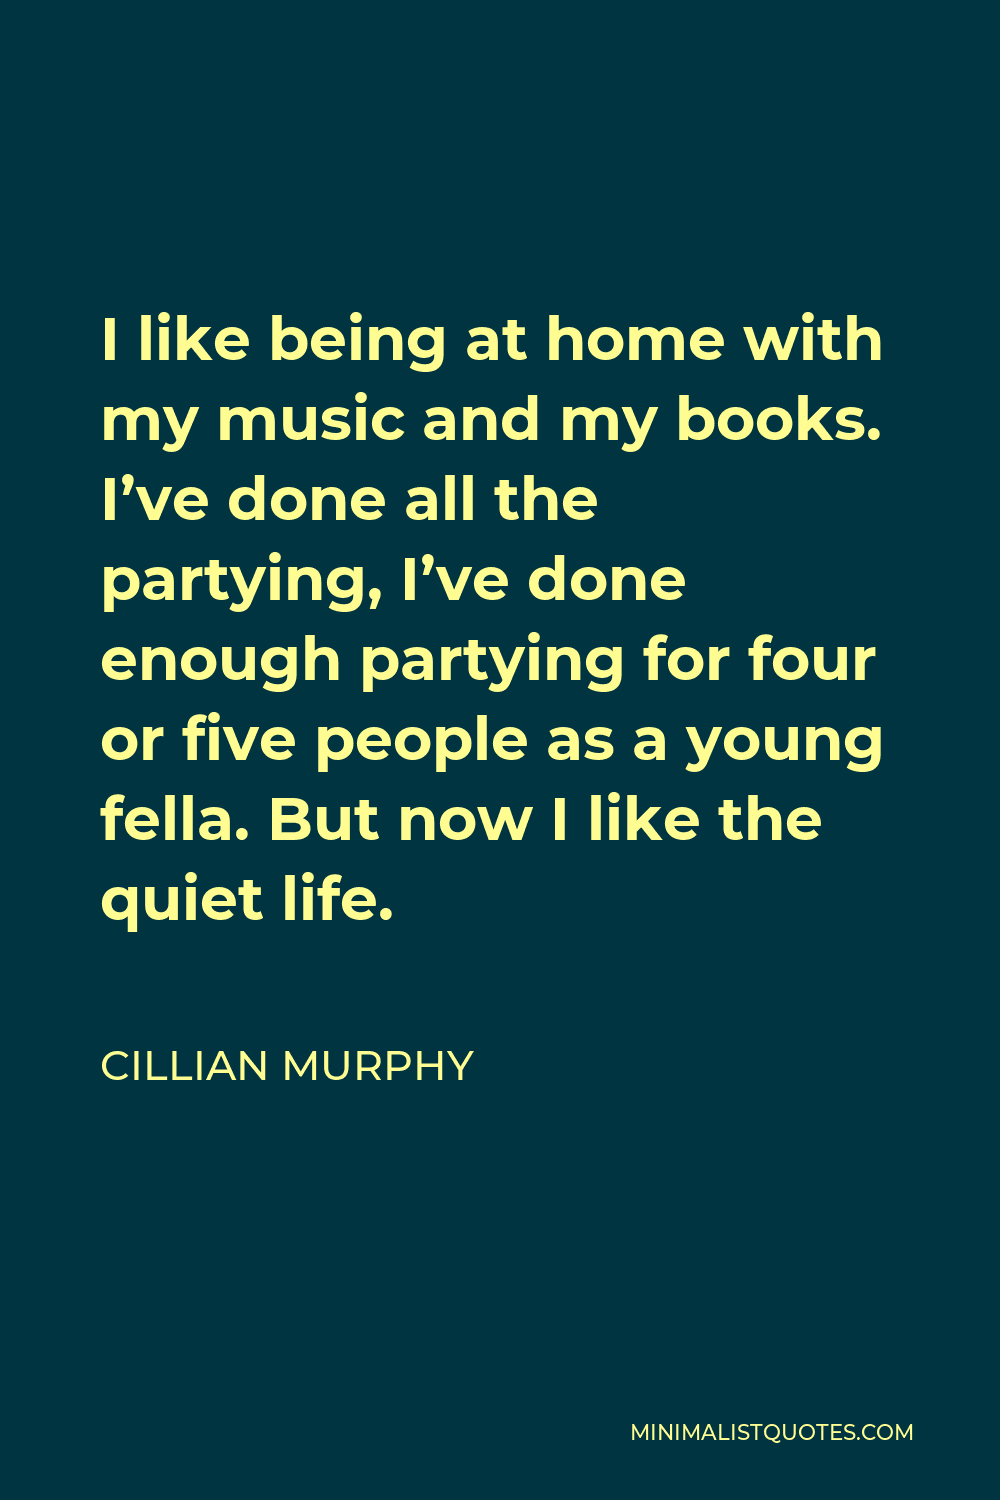 Cillian Murphy Quote - I like being at home with my music and my books. I’ve done all the partying, I’ve done enough partying for four or five people as a young fella. But now I like the quiet life.